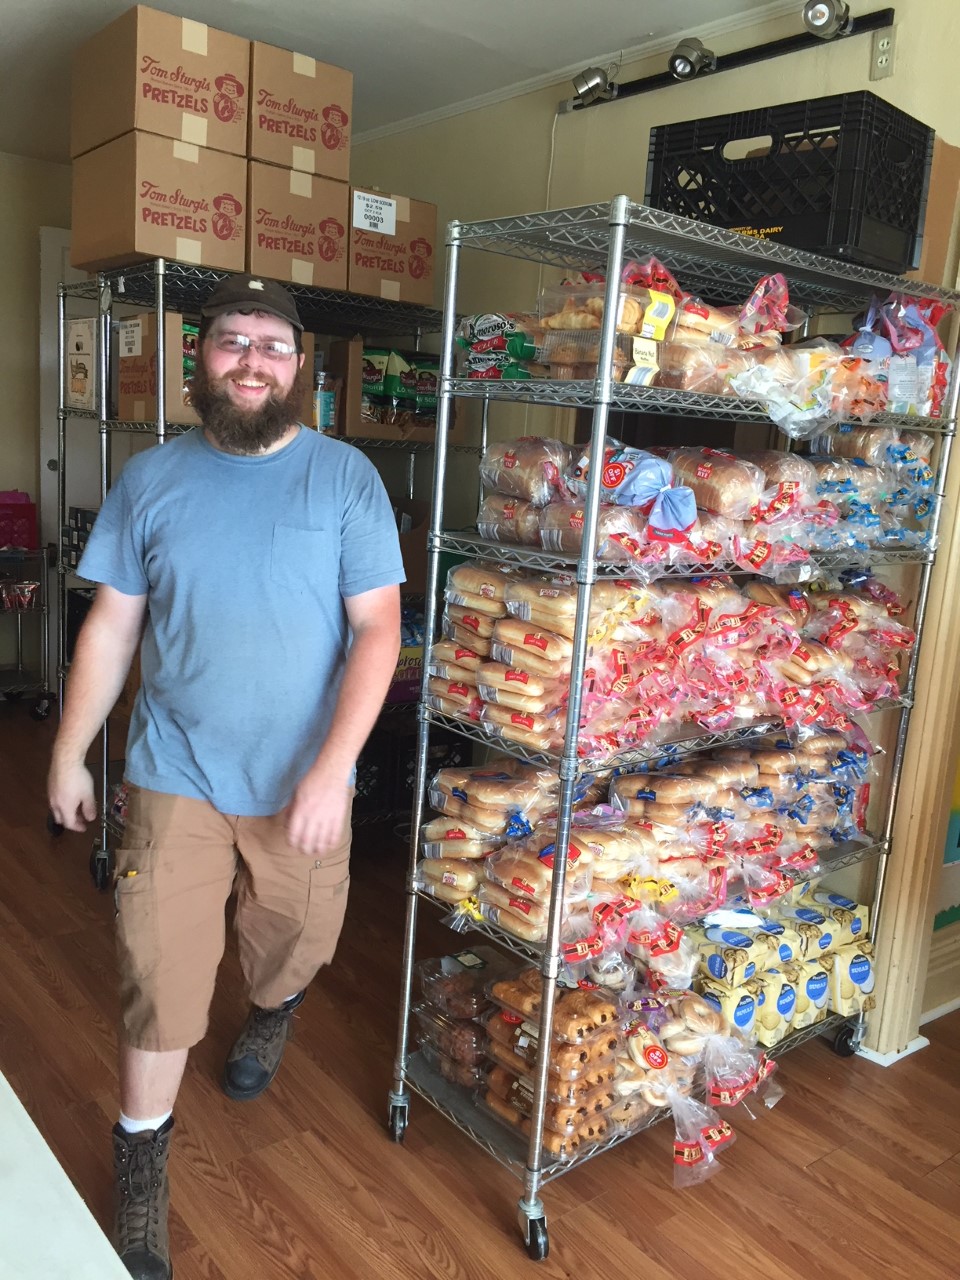 Our Friend Inc Staff, Ryan Tuerk helping stock shelves for the Student Food Pantry.